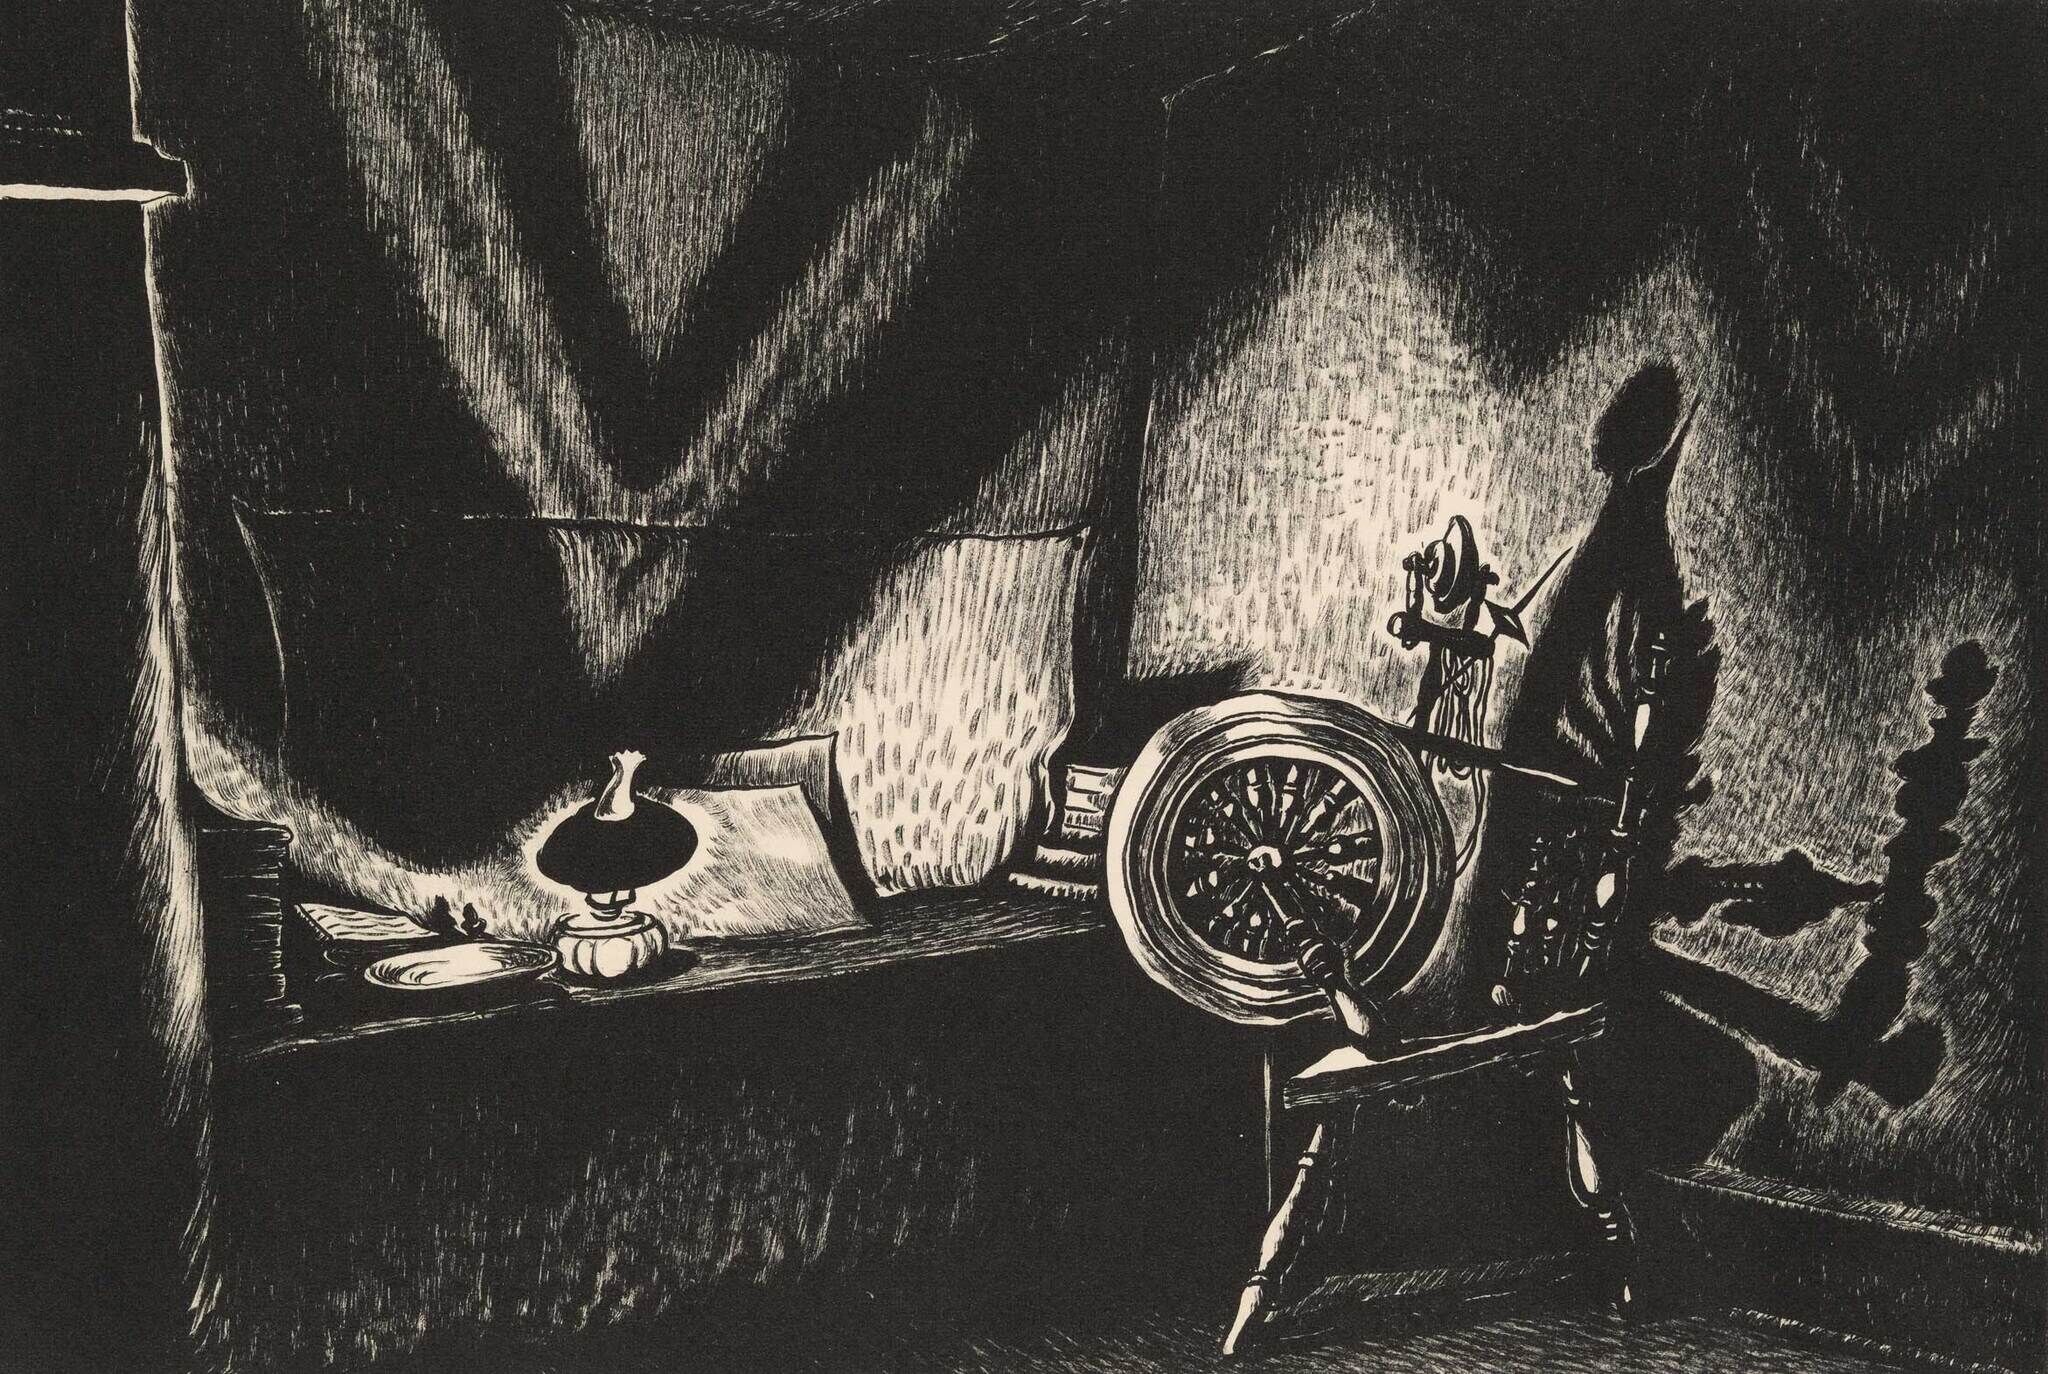 Monochrome etching of a dimly lit room with a spinning wheel, oil lamp on a table, and a shadowy figure standing by the window.